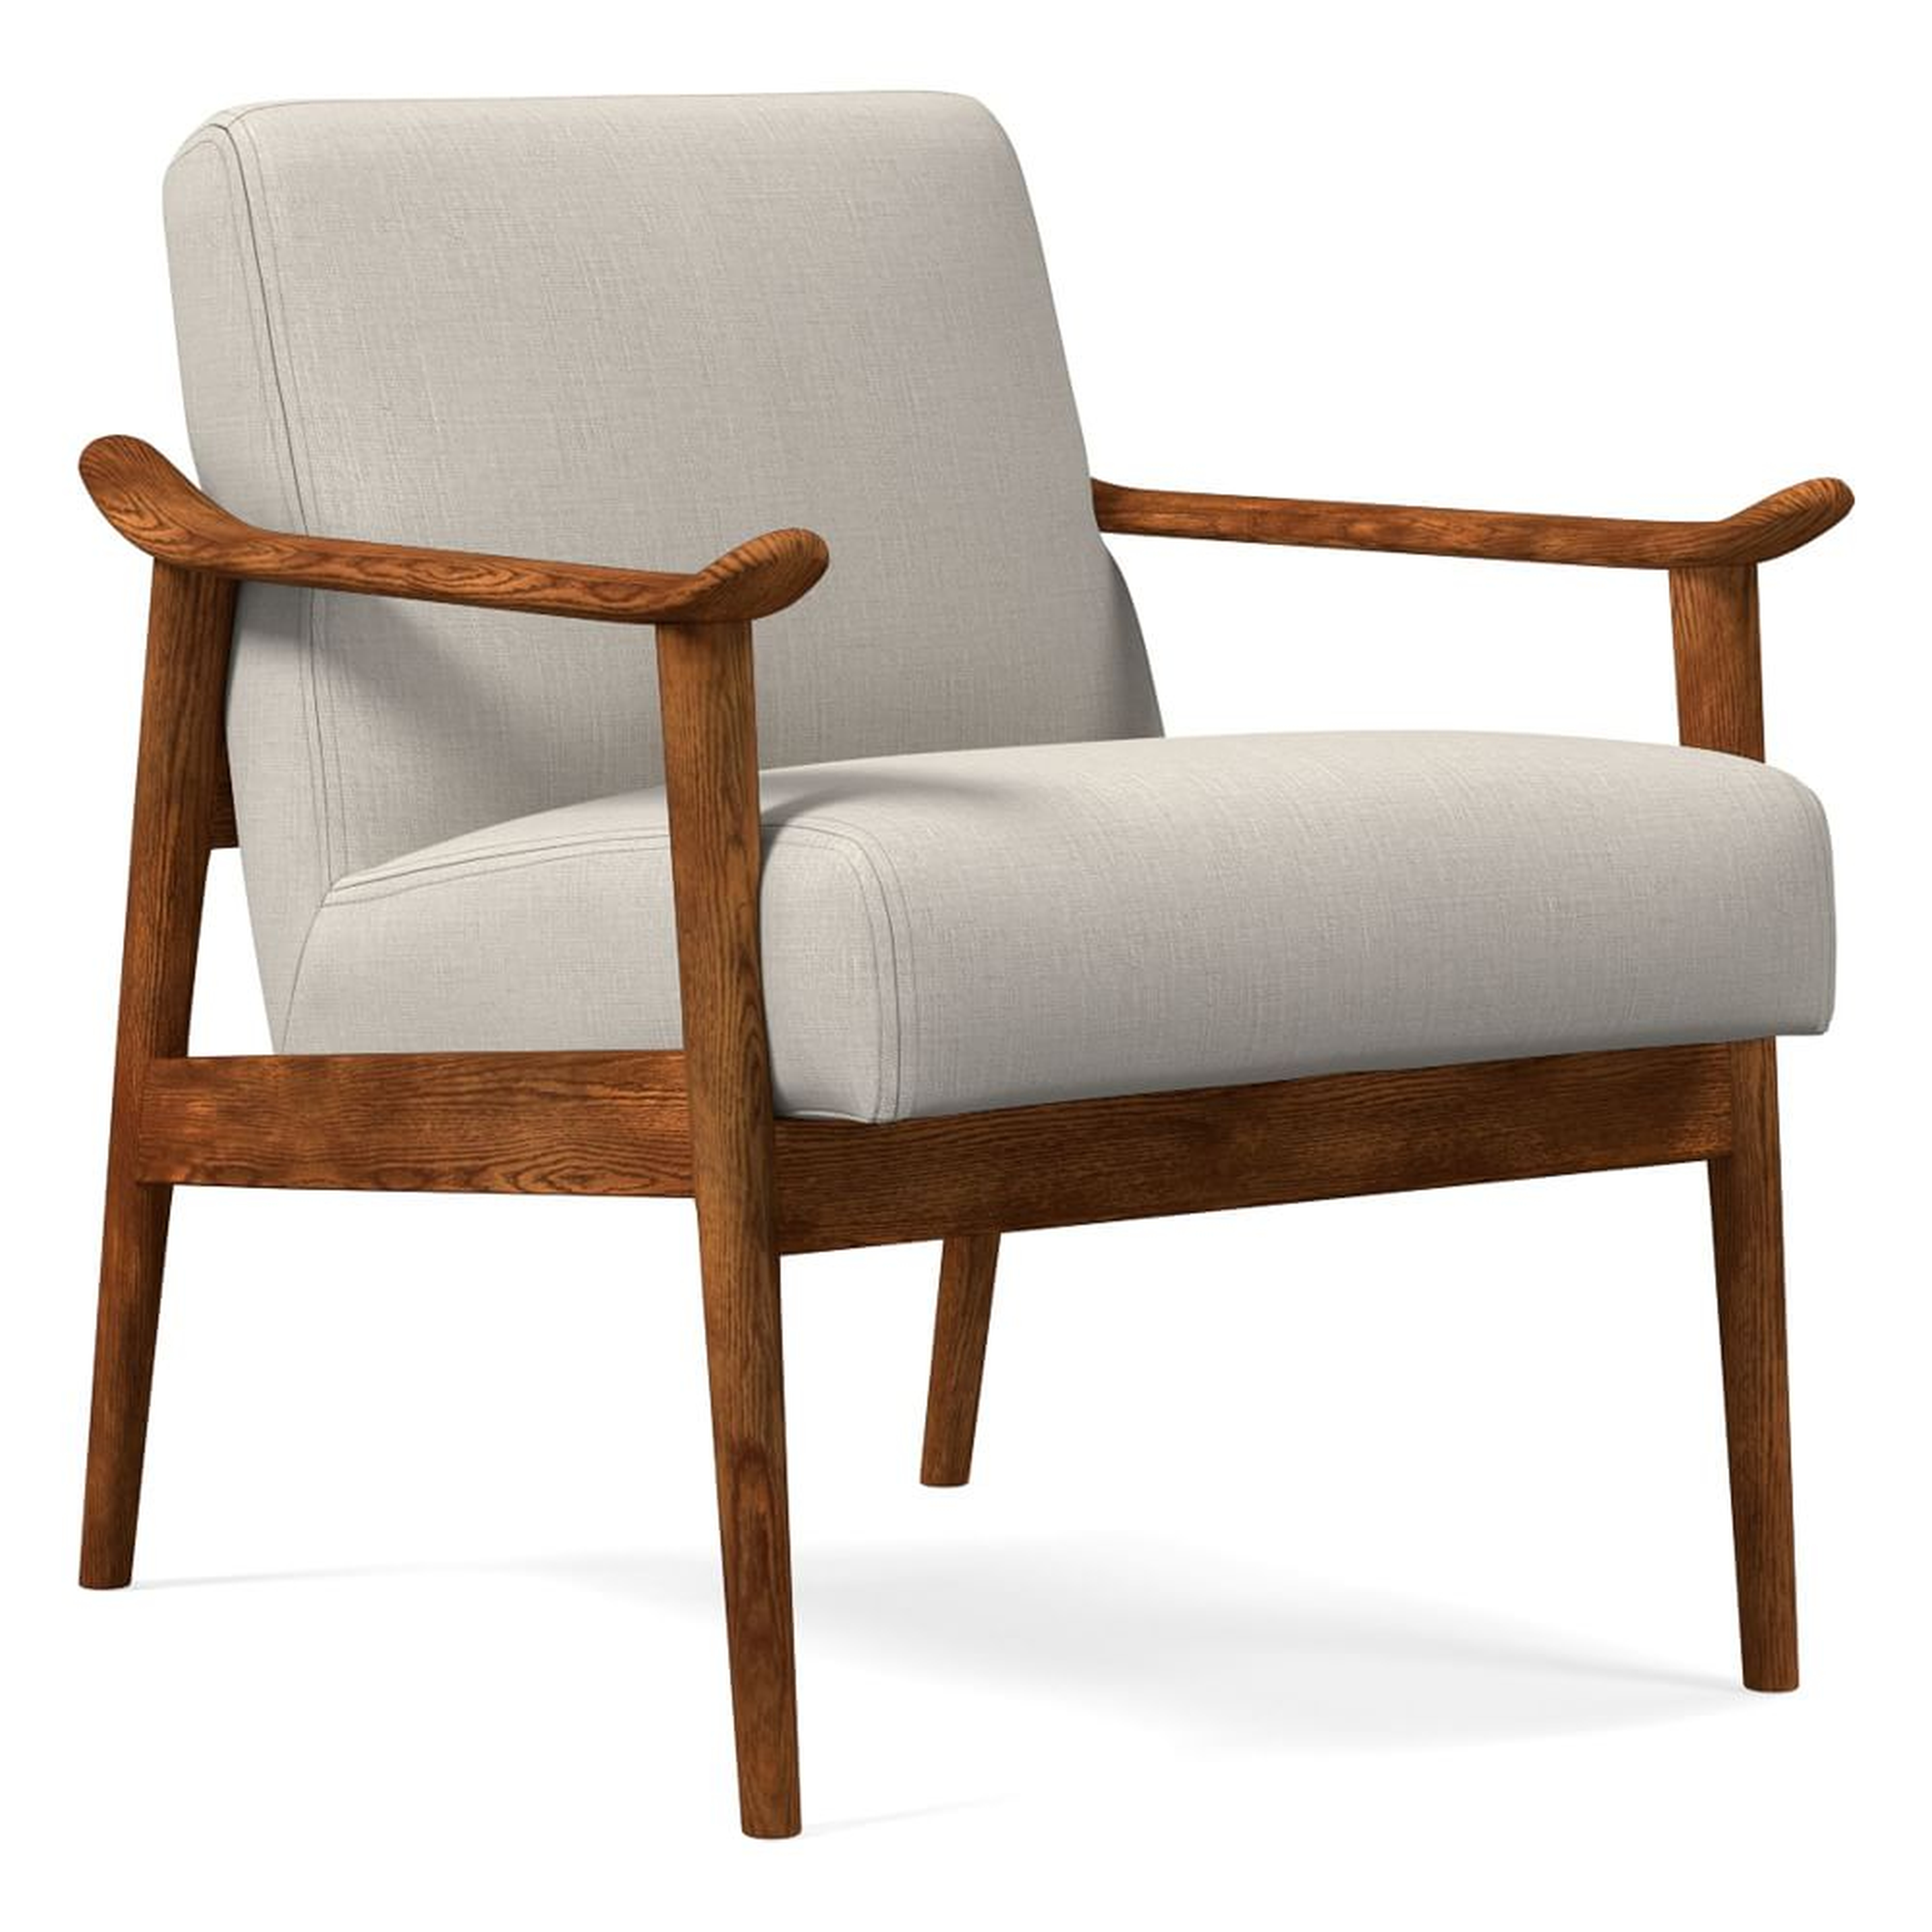 Midcentury Show Wood Chair, Poly, Yarn Dyed Linen Weave, Alabaster, Pecan - West Elm